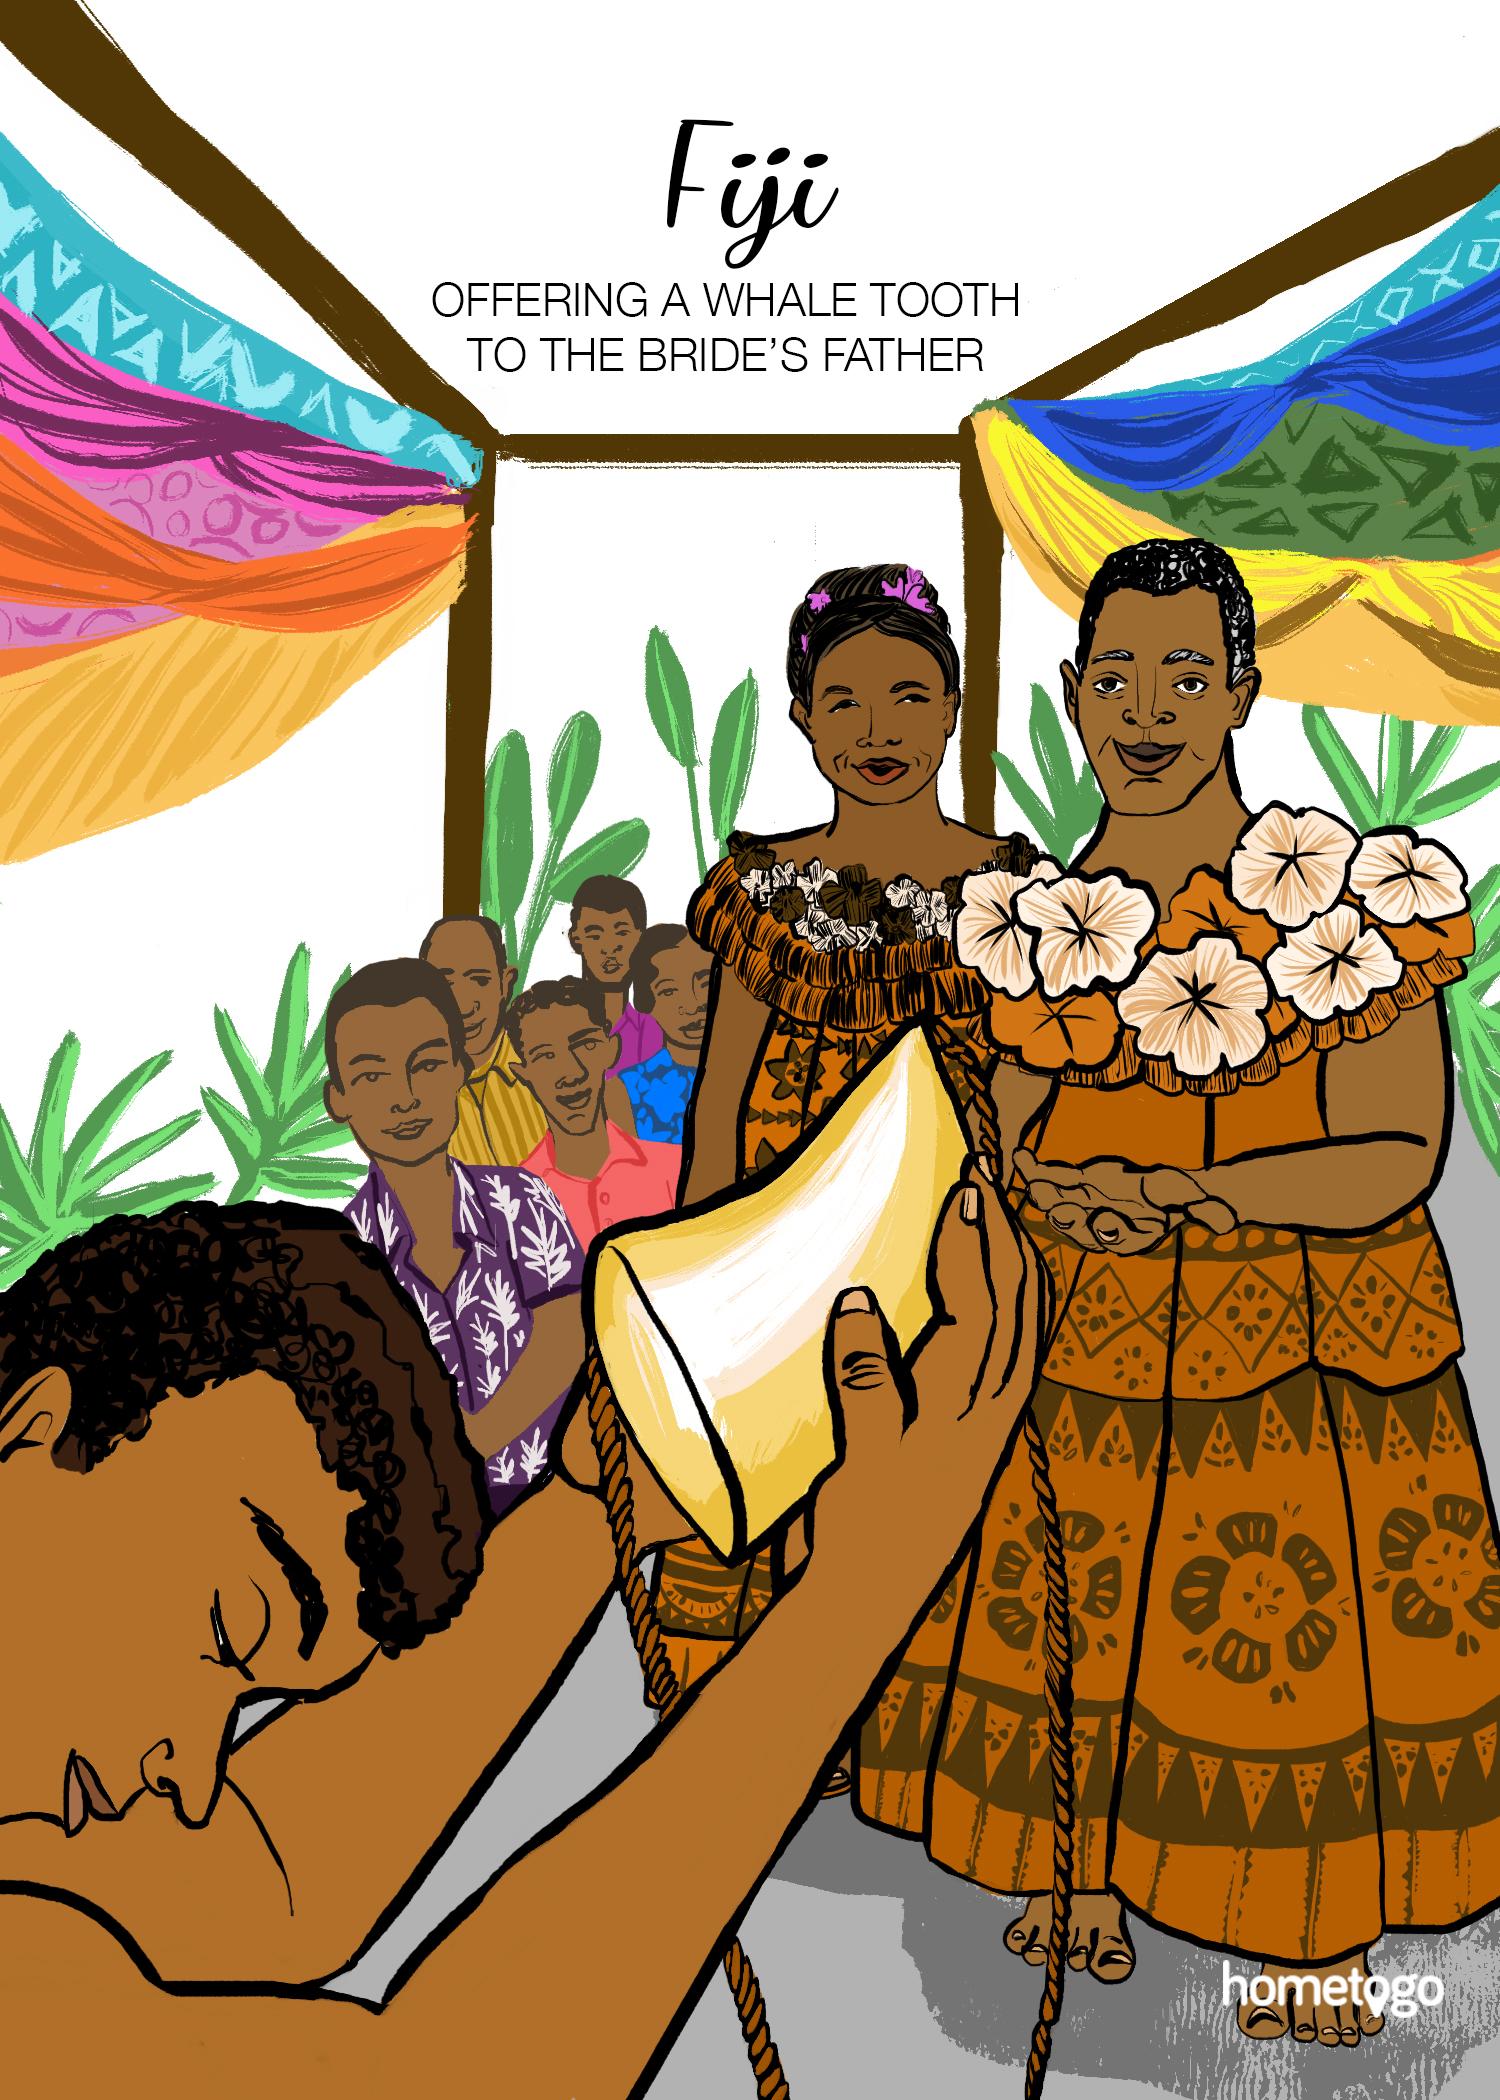 Illustration featuring the wedding custom from Fiji, where the groom has to offer a whale tooth to the bride's father